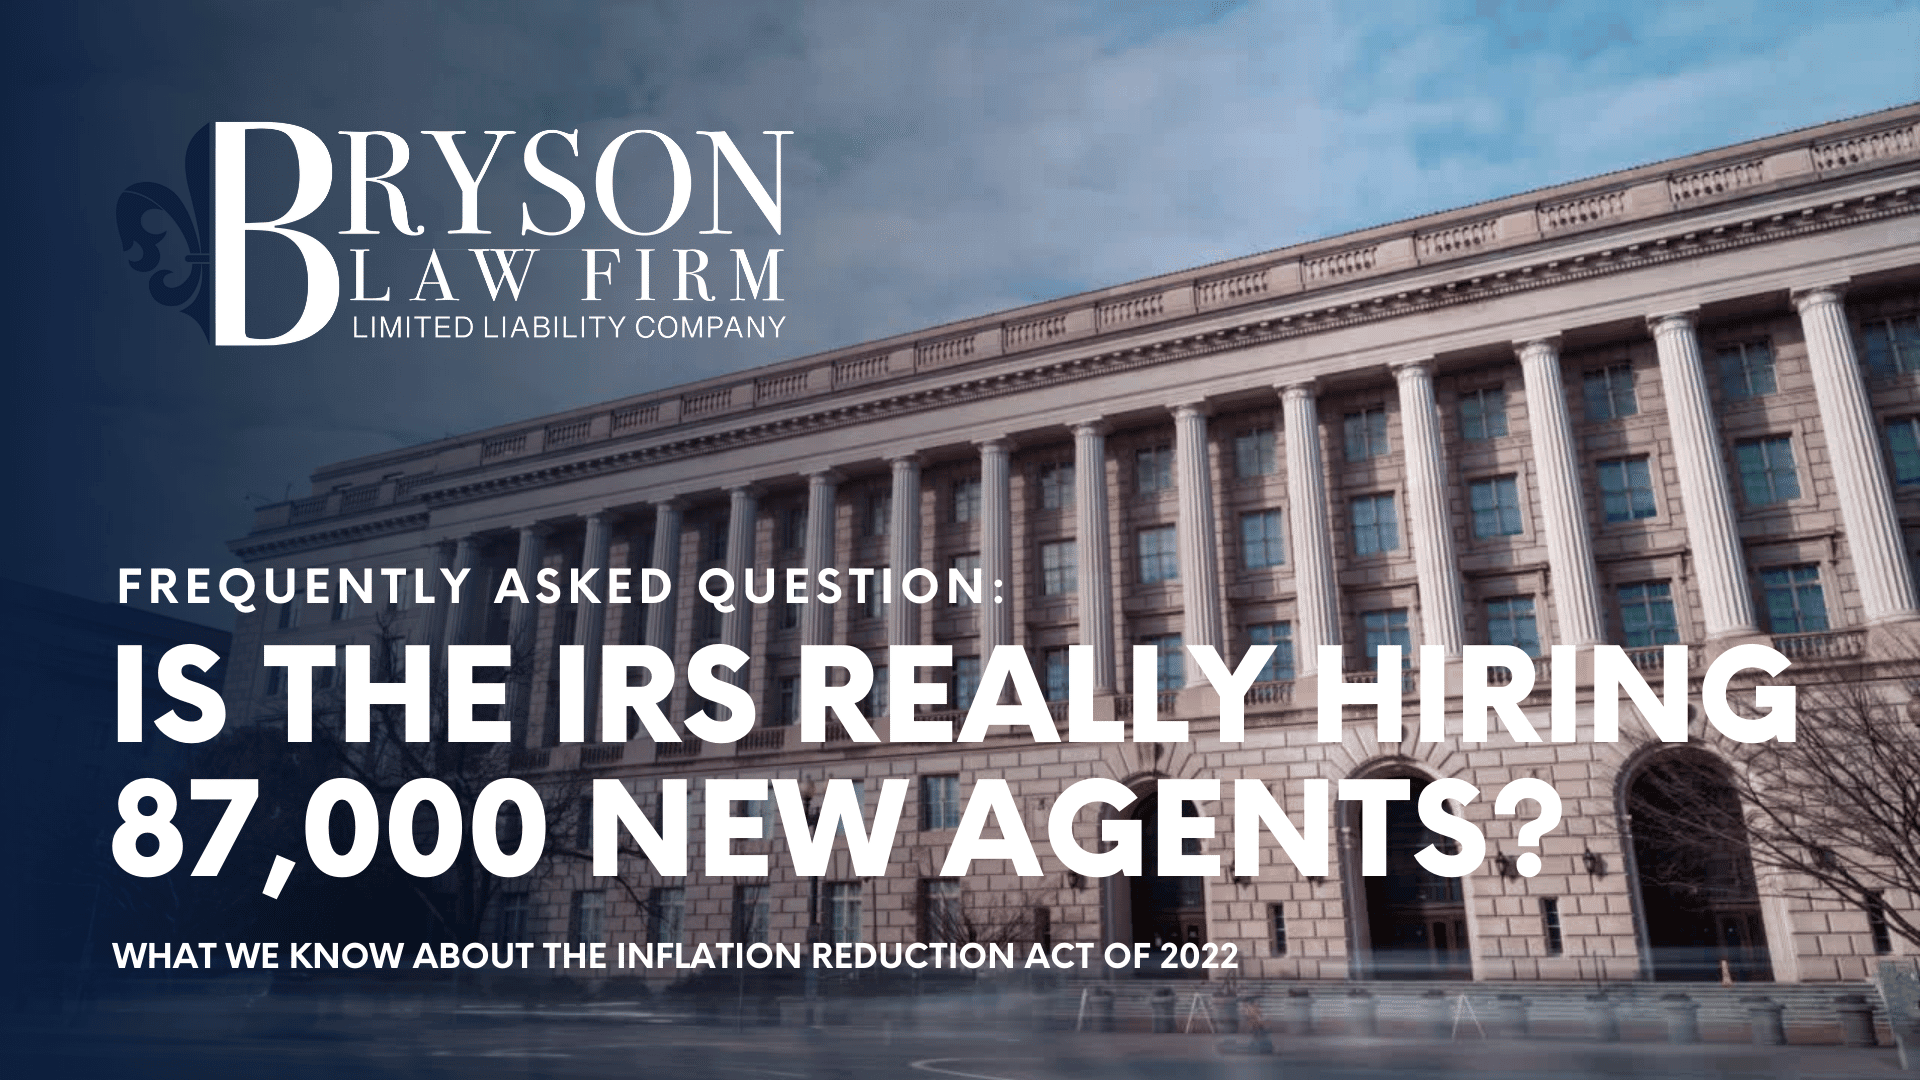 The Inflation Reduction Act of 2022 and a Revitalized IRS - Are 87,000 New IRS Agents Coming Soon?